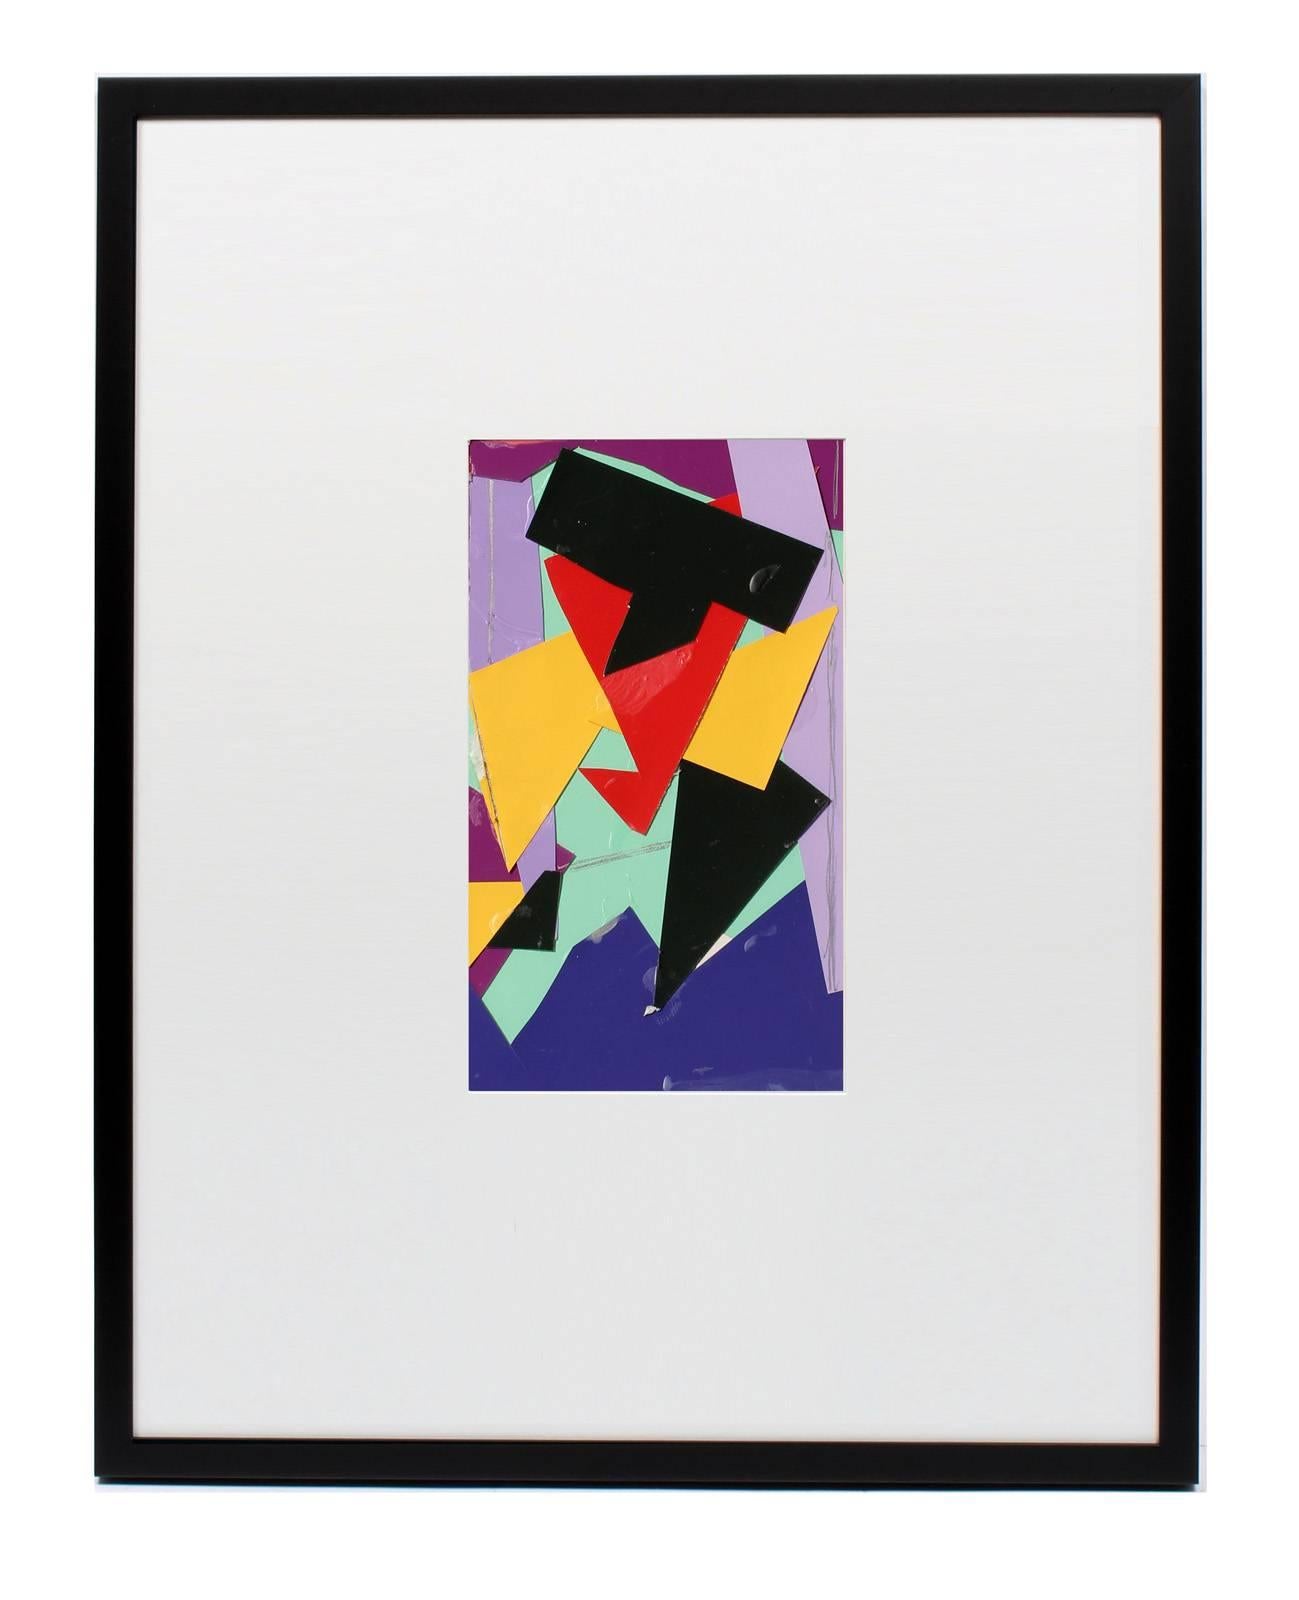 Pair of Cut Paper Collages - Abstract Geometric Mixed Media Art by Ricardo Morin